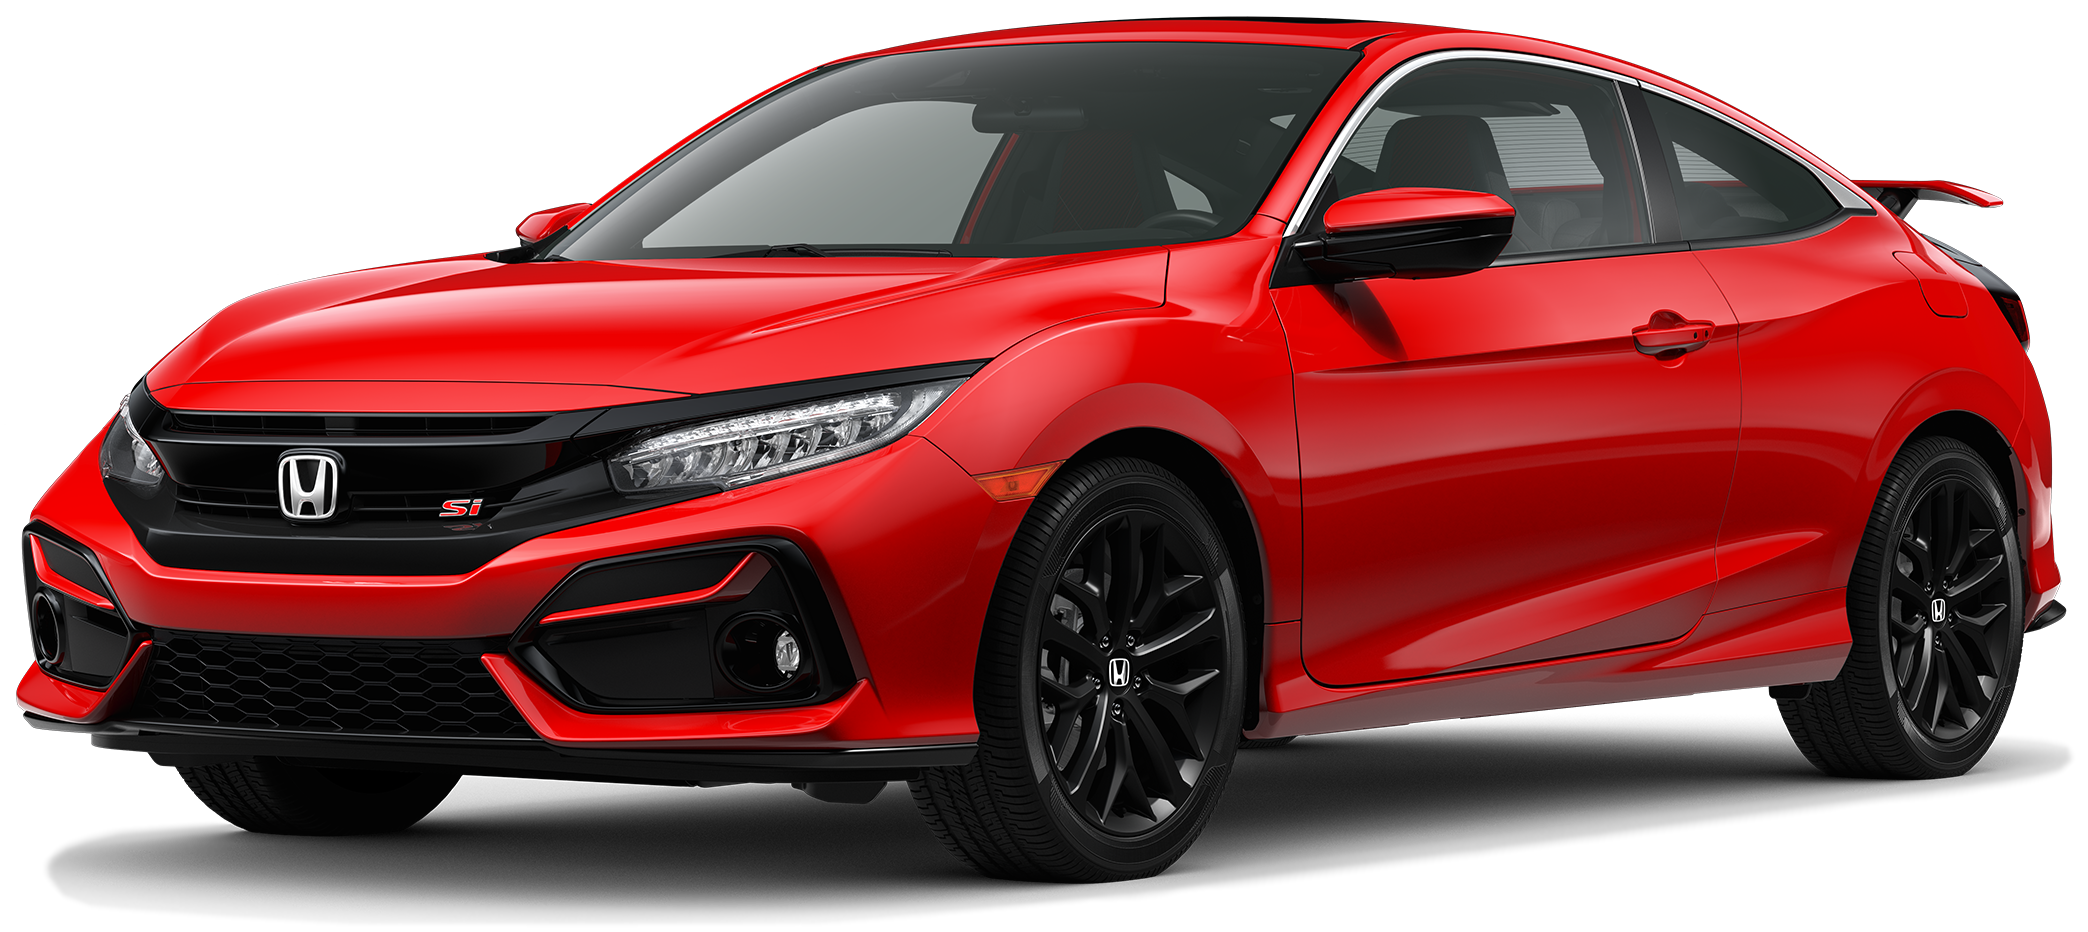 2020 Honda Civic Si Incentives, Specials & Offers in Las Vegas NV